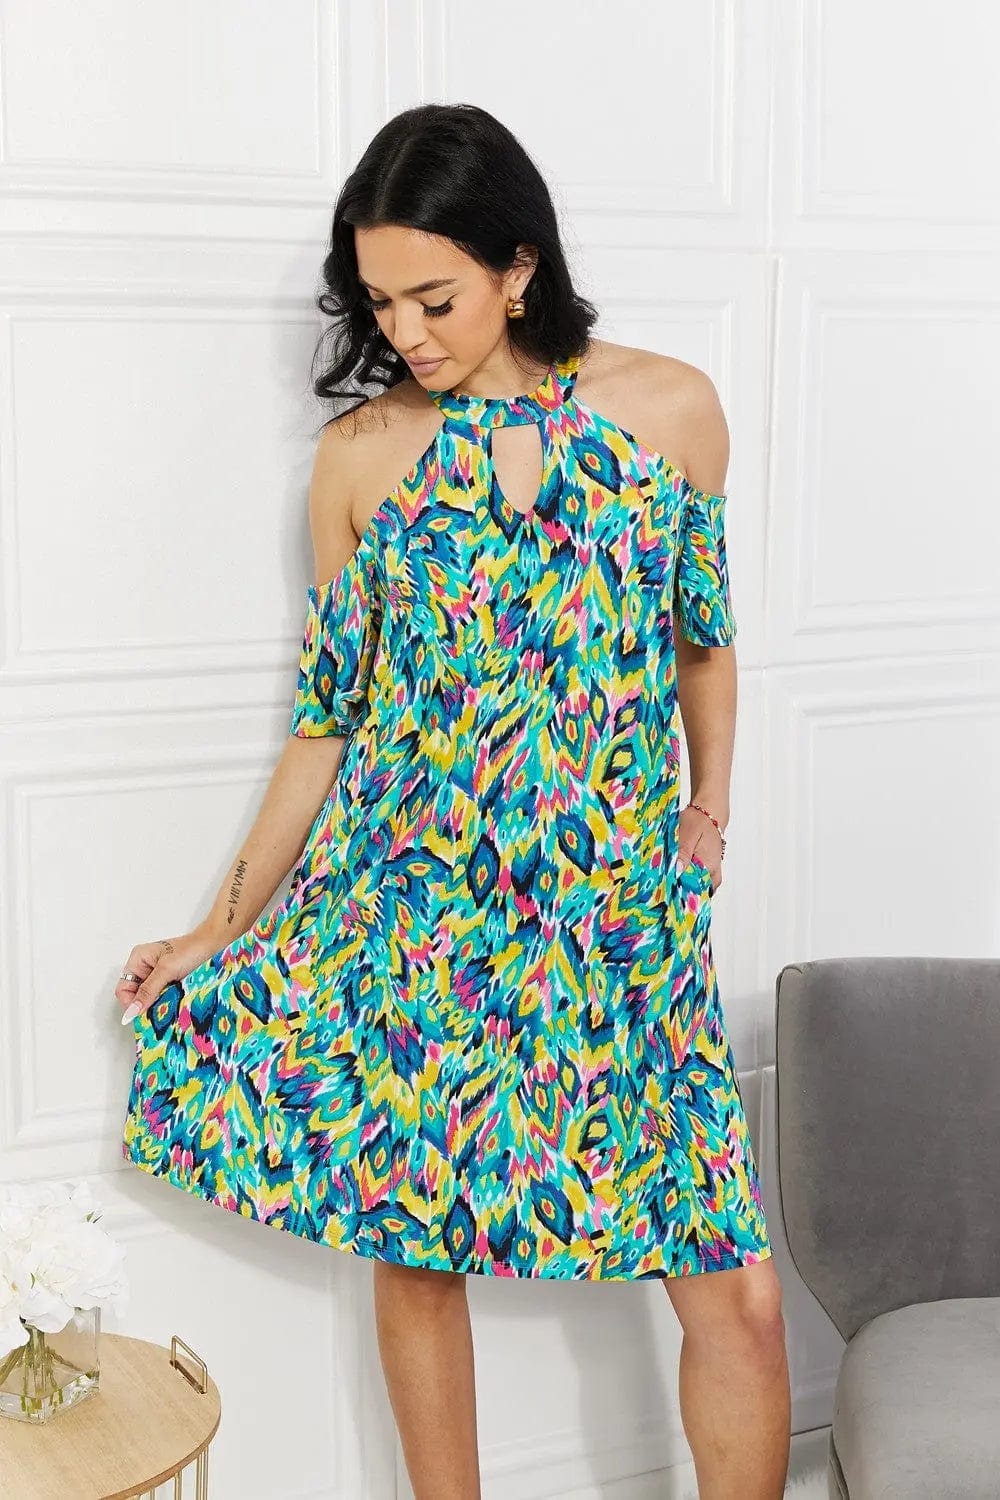 Sew In Love Full Size Perfect Paradise Printed Cold-Shoulder Dress  45.00 MPGD Corp Merchandise